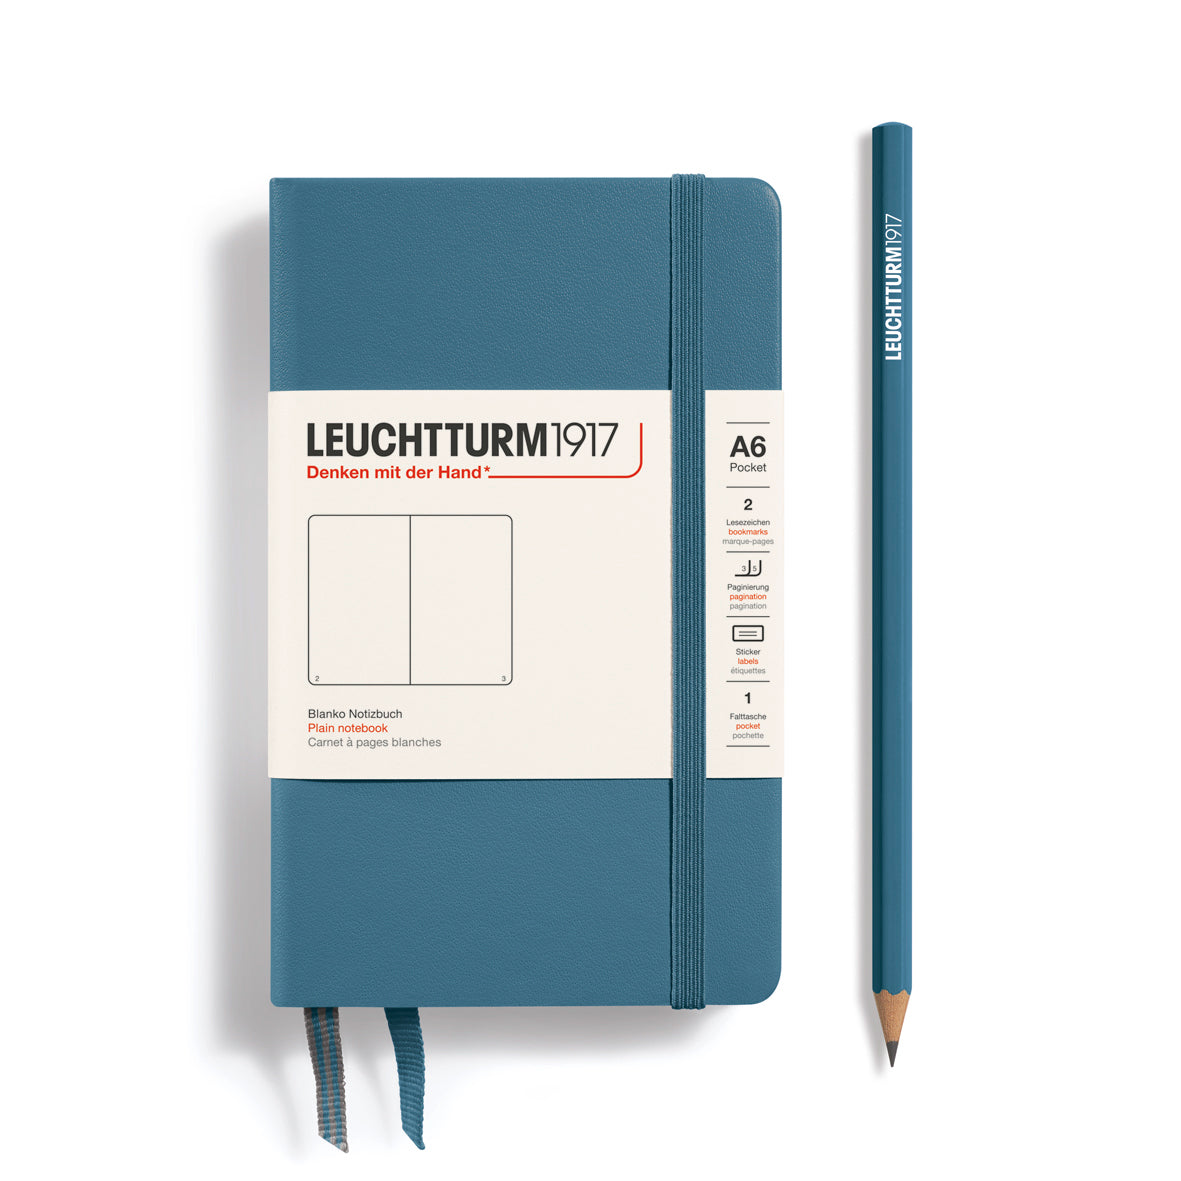 Leuchtturm1917 Notebook A6 Pocket Hardcover in stone blue and plain ruling from penny black